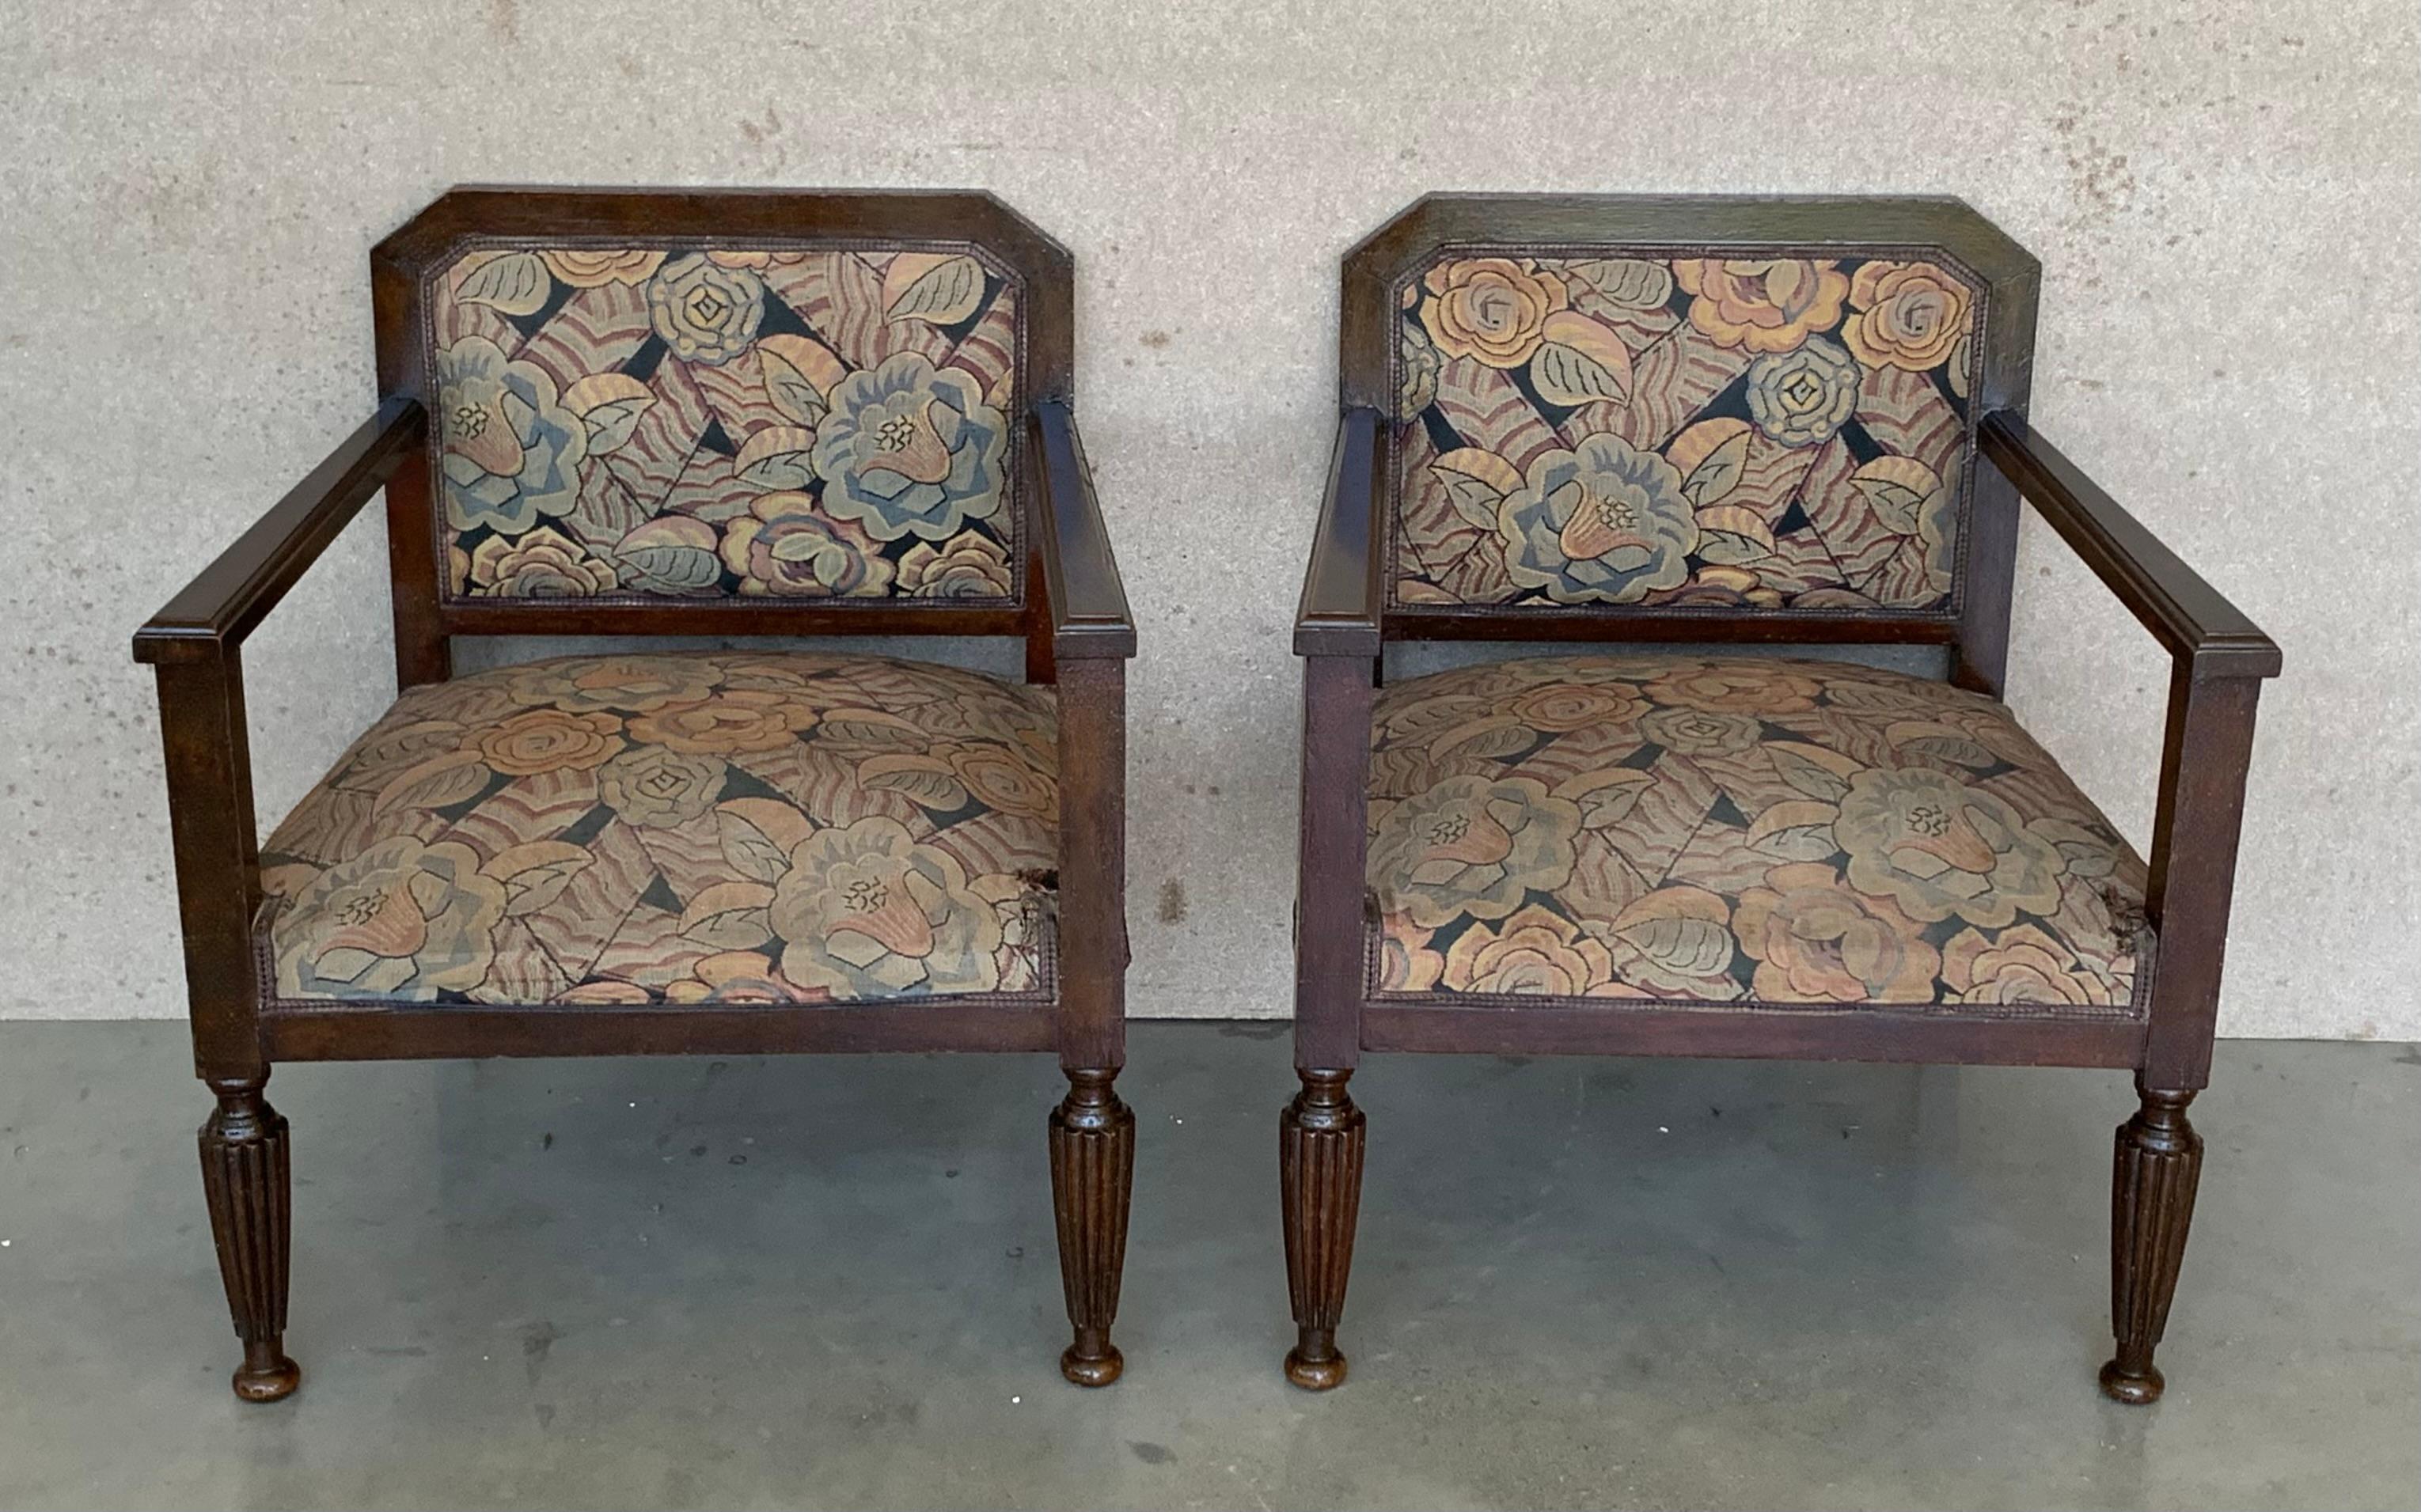 Beautiful Art Deco lounge chairs with the typical design and fabric of this period. Very comfortable , wood in perfect condition and restored. The fabric needs a reupholster.